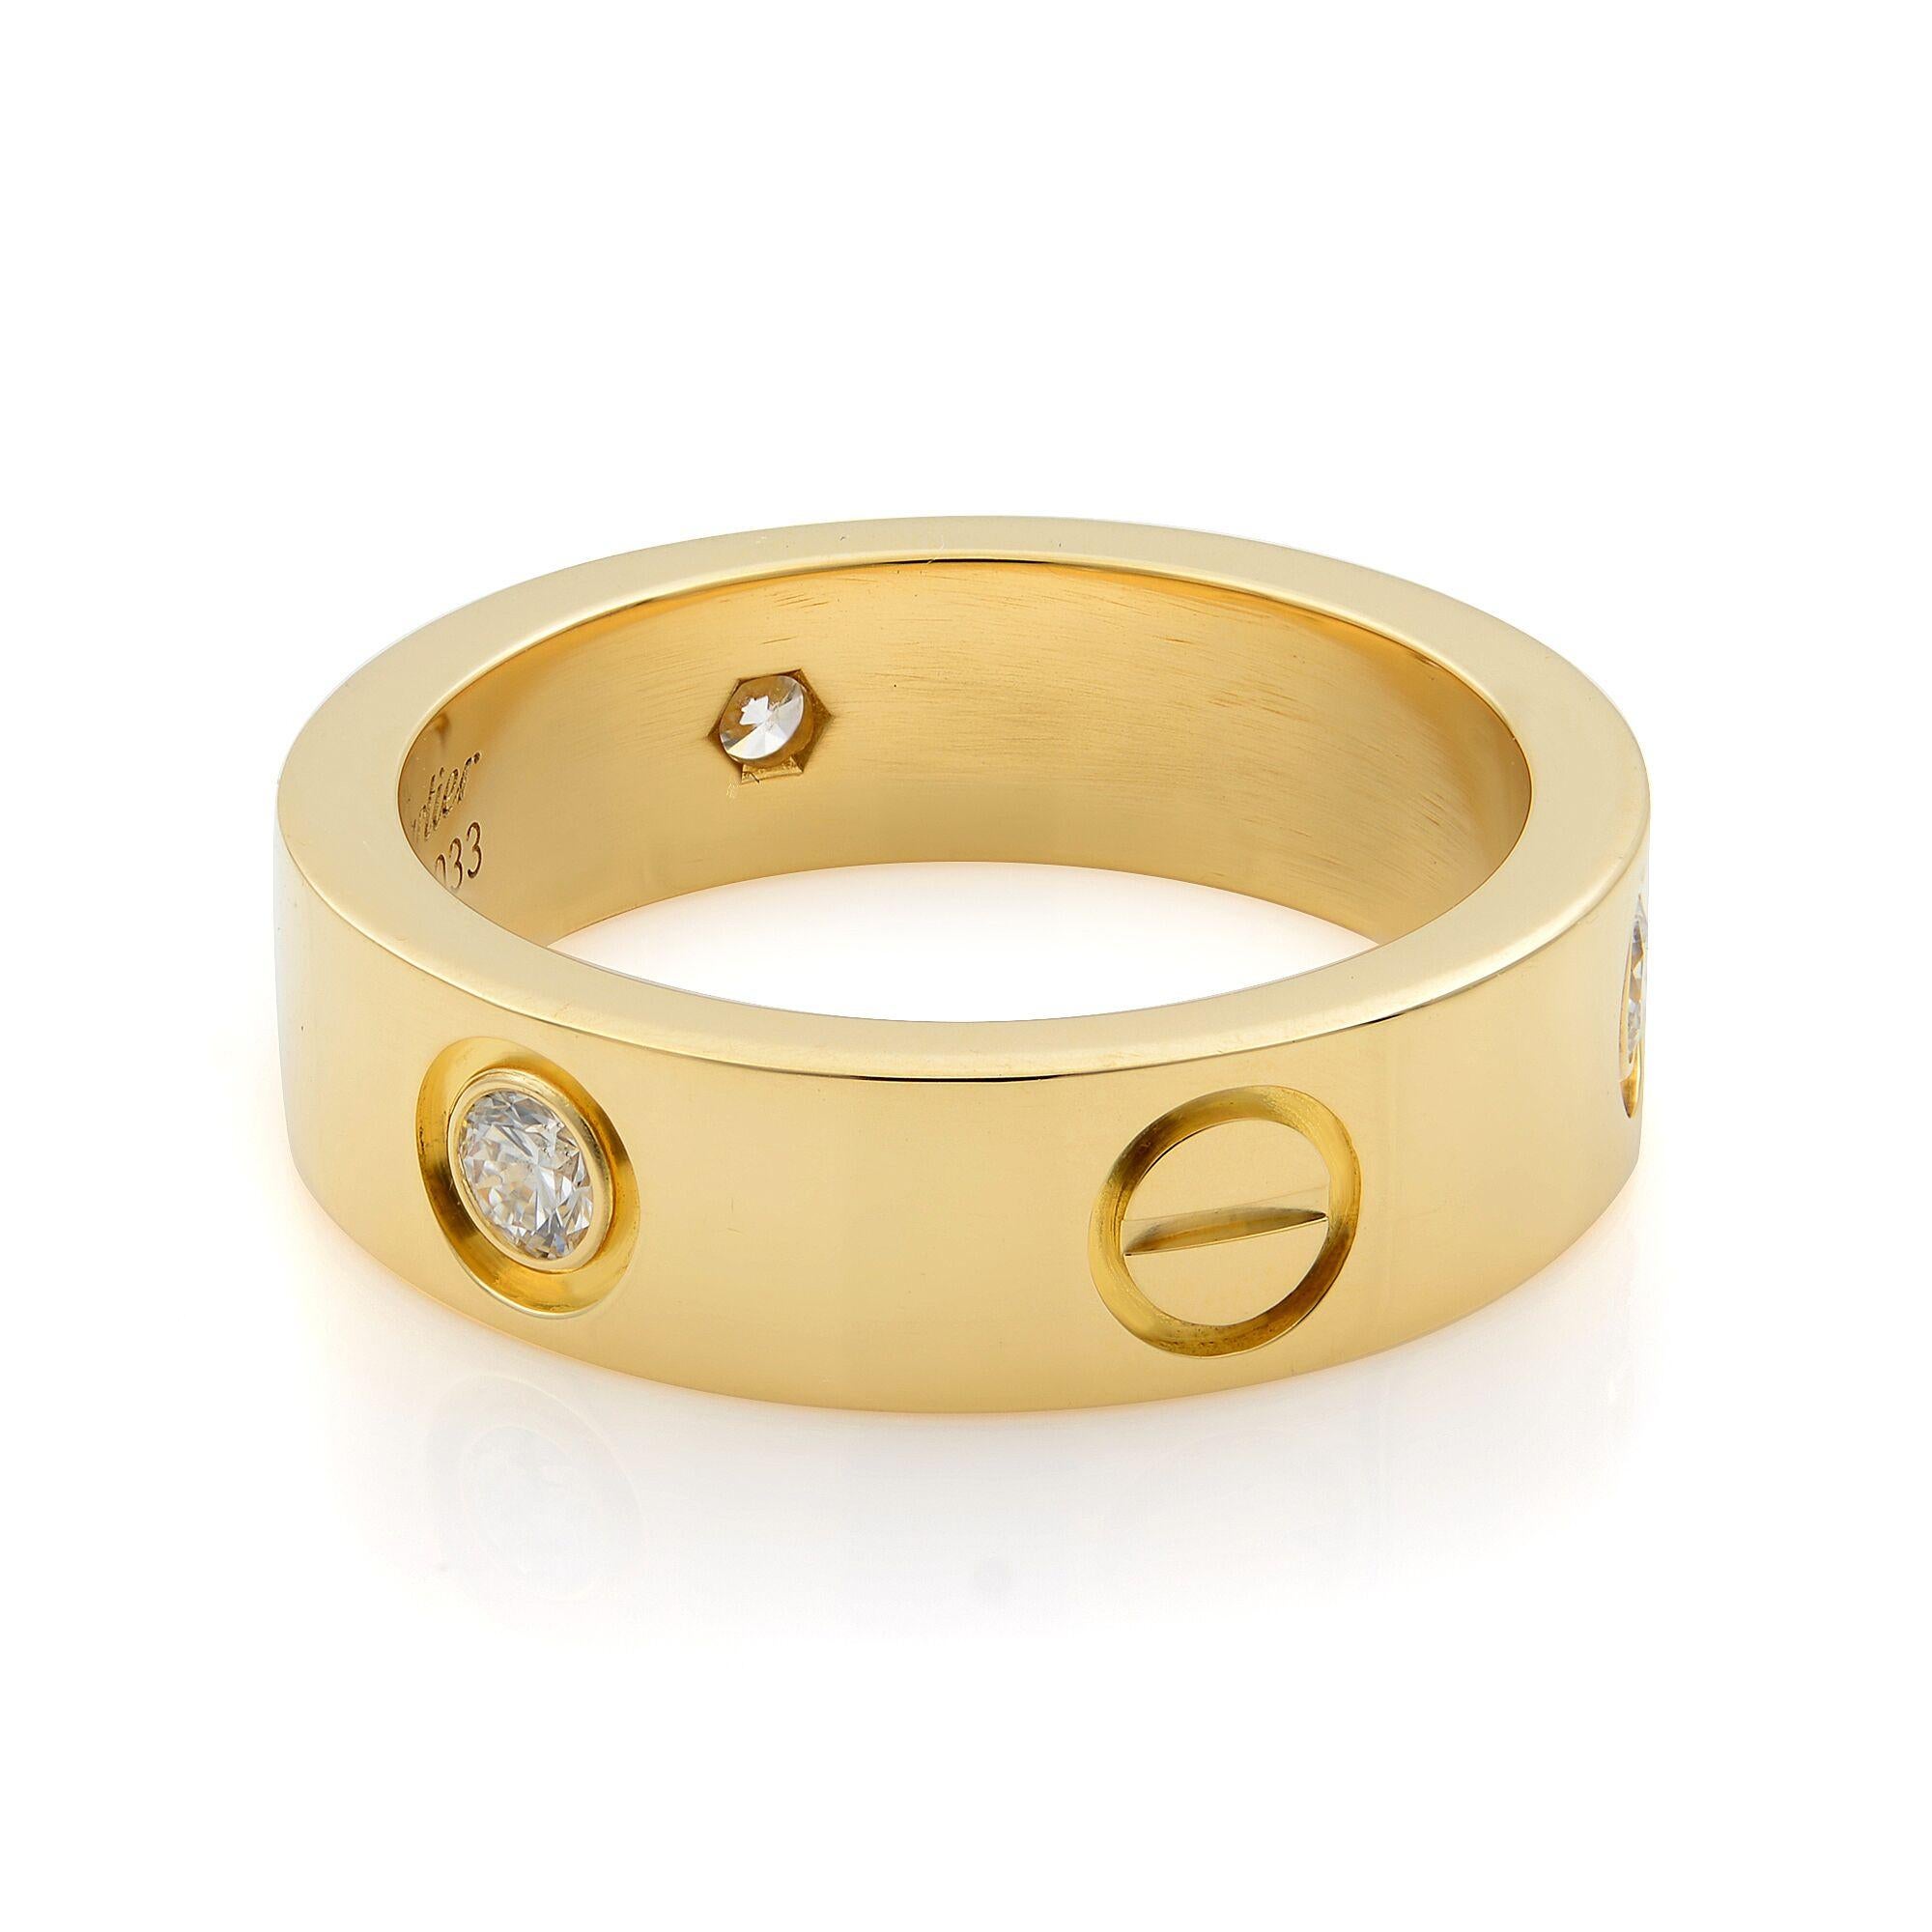 Cartier Love ring in 18K yellow gold, set with 3 brilliant-cut diamonds totaling 0.22 carats. Width of the ring is 5.5mm.
Excellent pre-owned condition (no signs of wear). Comes without original box and without papers. 